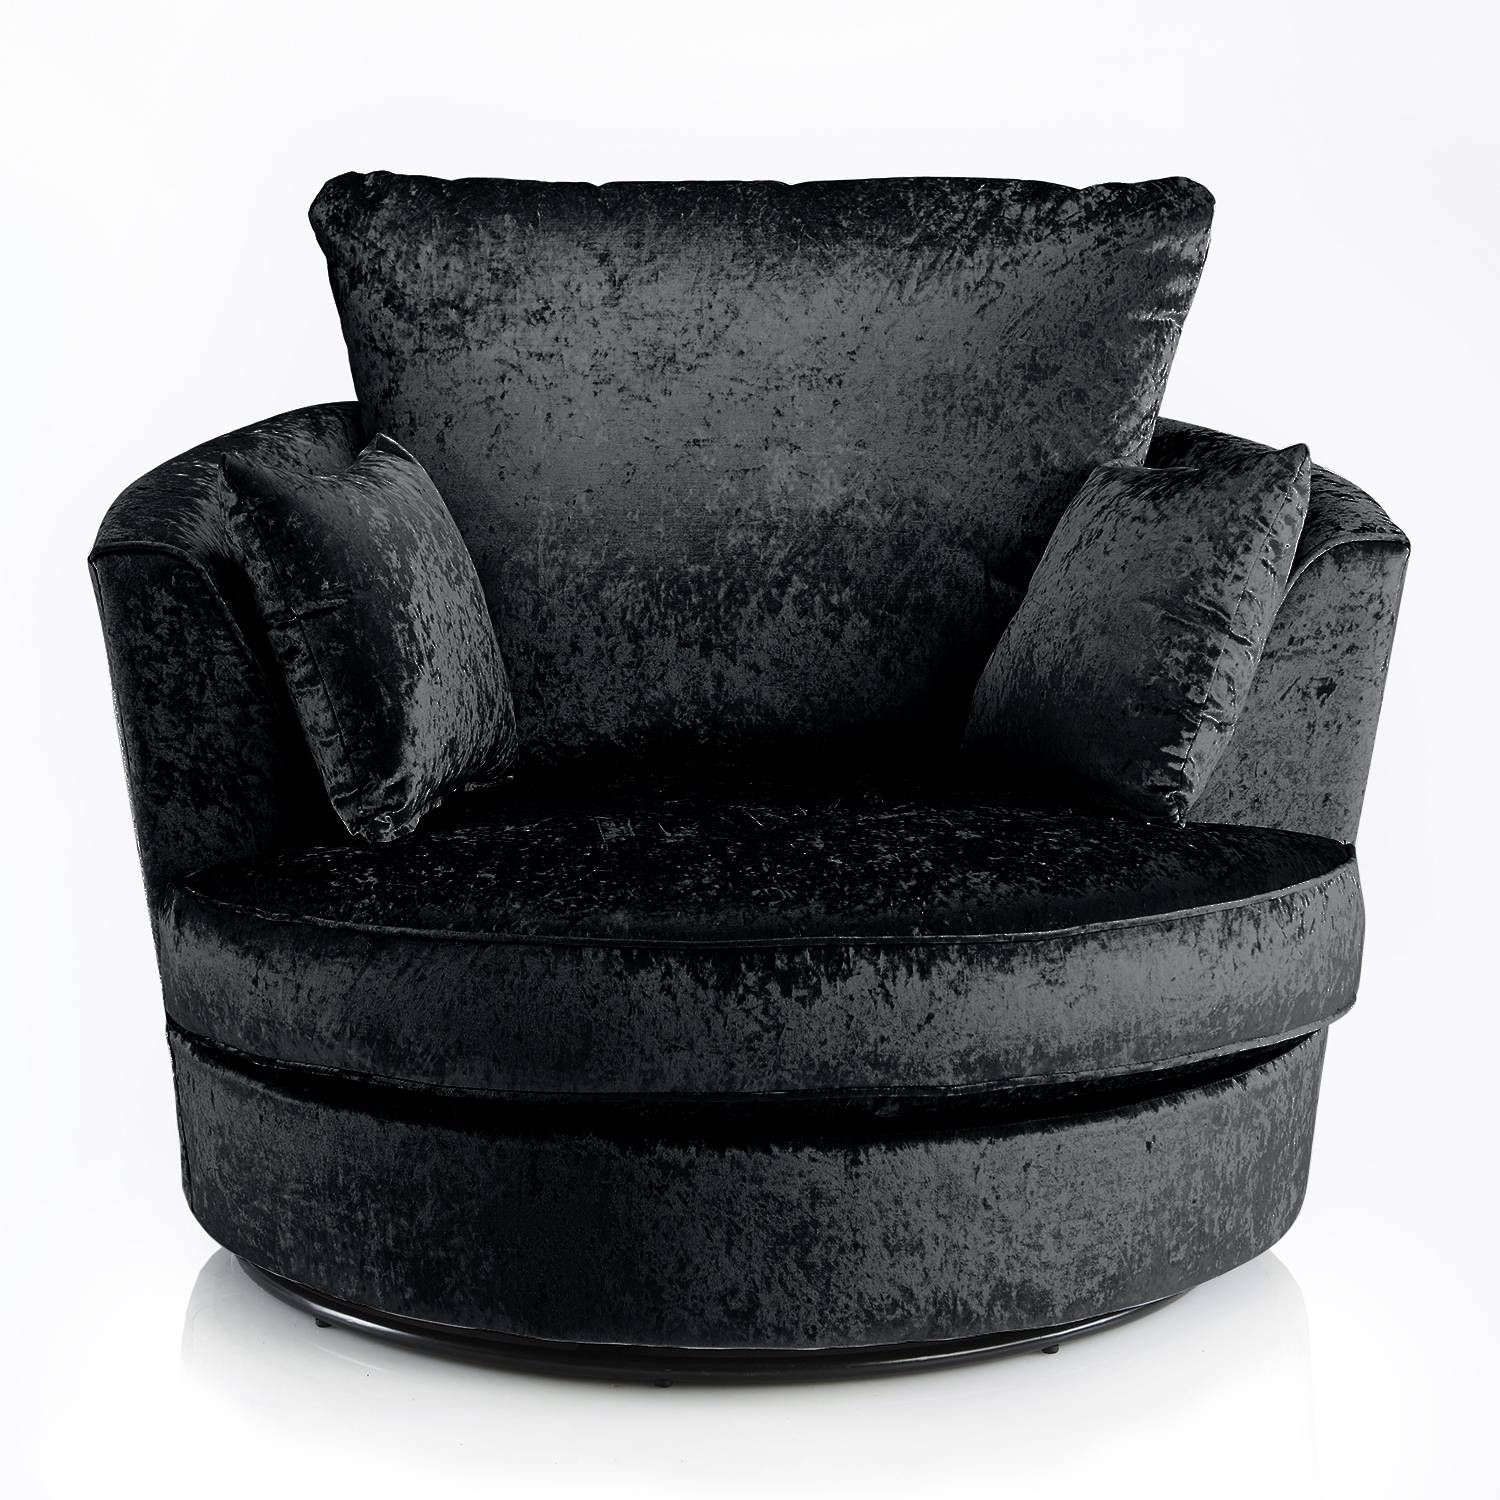 Crushed Velvet Furniture | Sofas, Beds, Chairs, Cushions Inside Cuddler Swivel Sofa Chairs (Photo 26 of 30)